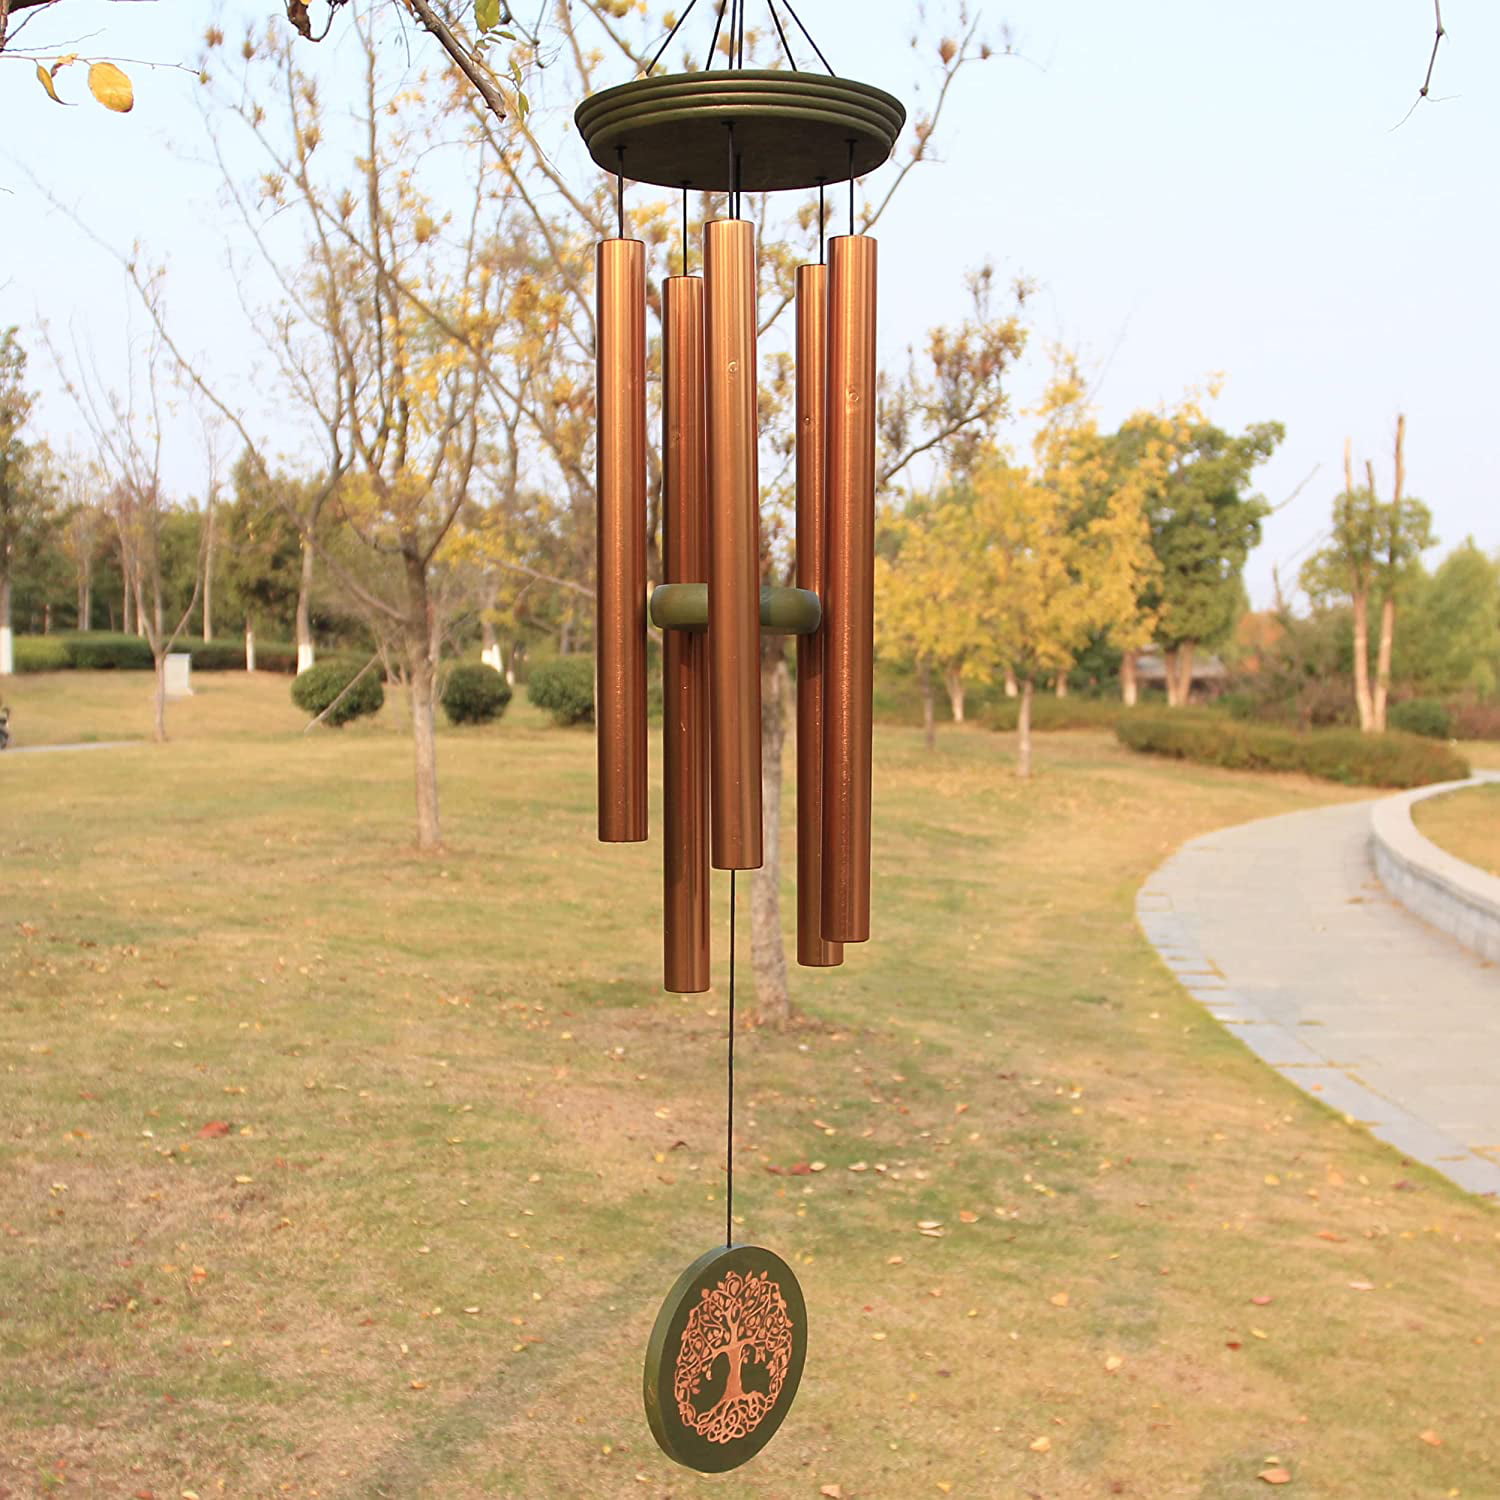 Sympathy Wind Chimes Outdoor Large Deep Tone Tree of Life for Father Mother Family,Xmas Home Garden Hanging Decor Memorial Wind Chimes Outdoor,36 Inch Windchimes Unique Outdoor Engraved Tree of Life